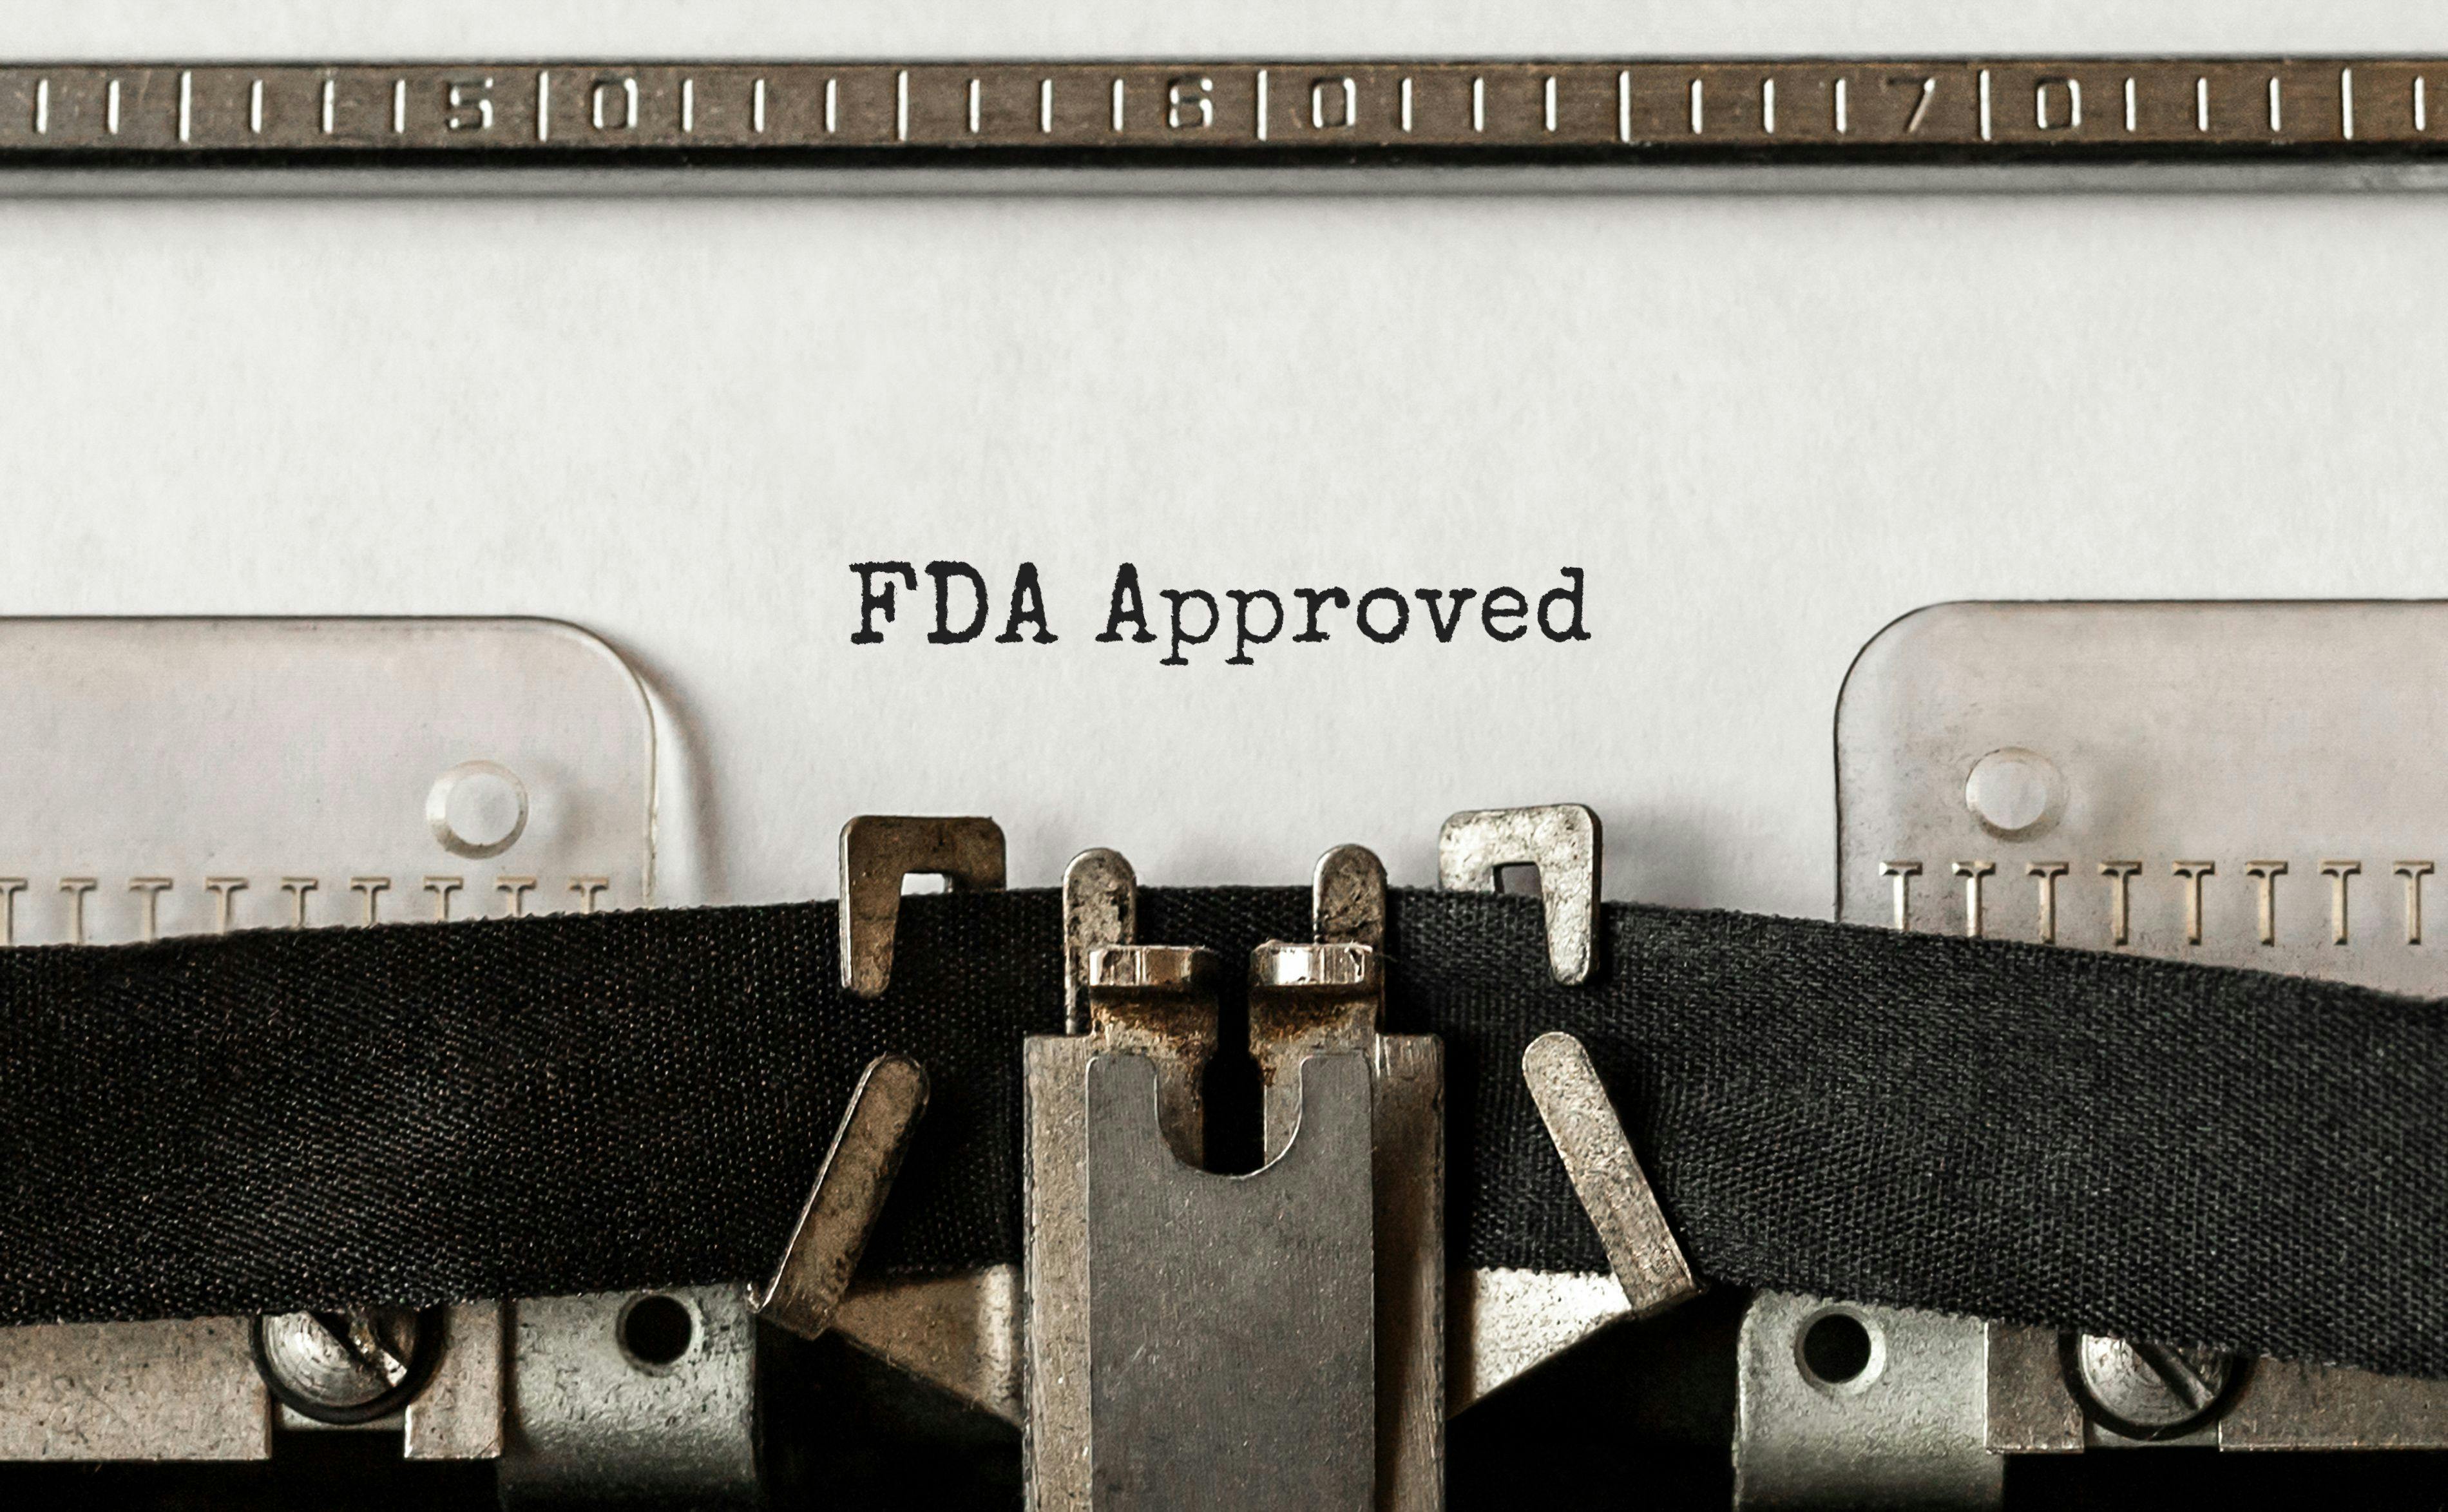 First, only zonisamide oral suspension for treatment of partial seizures approved by FDA